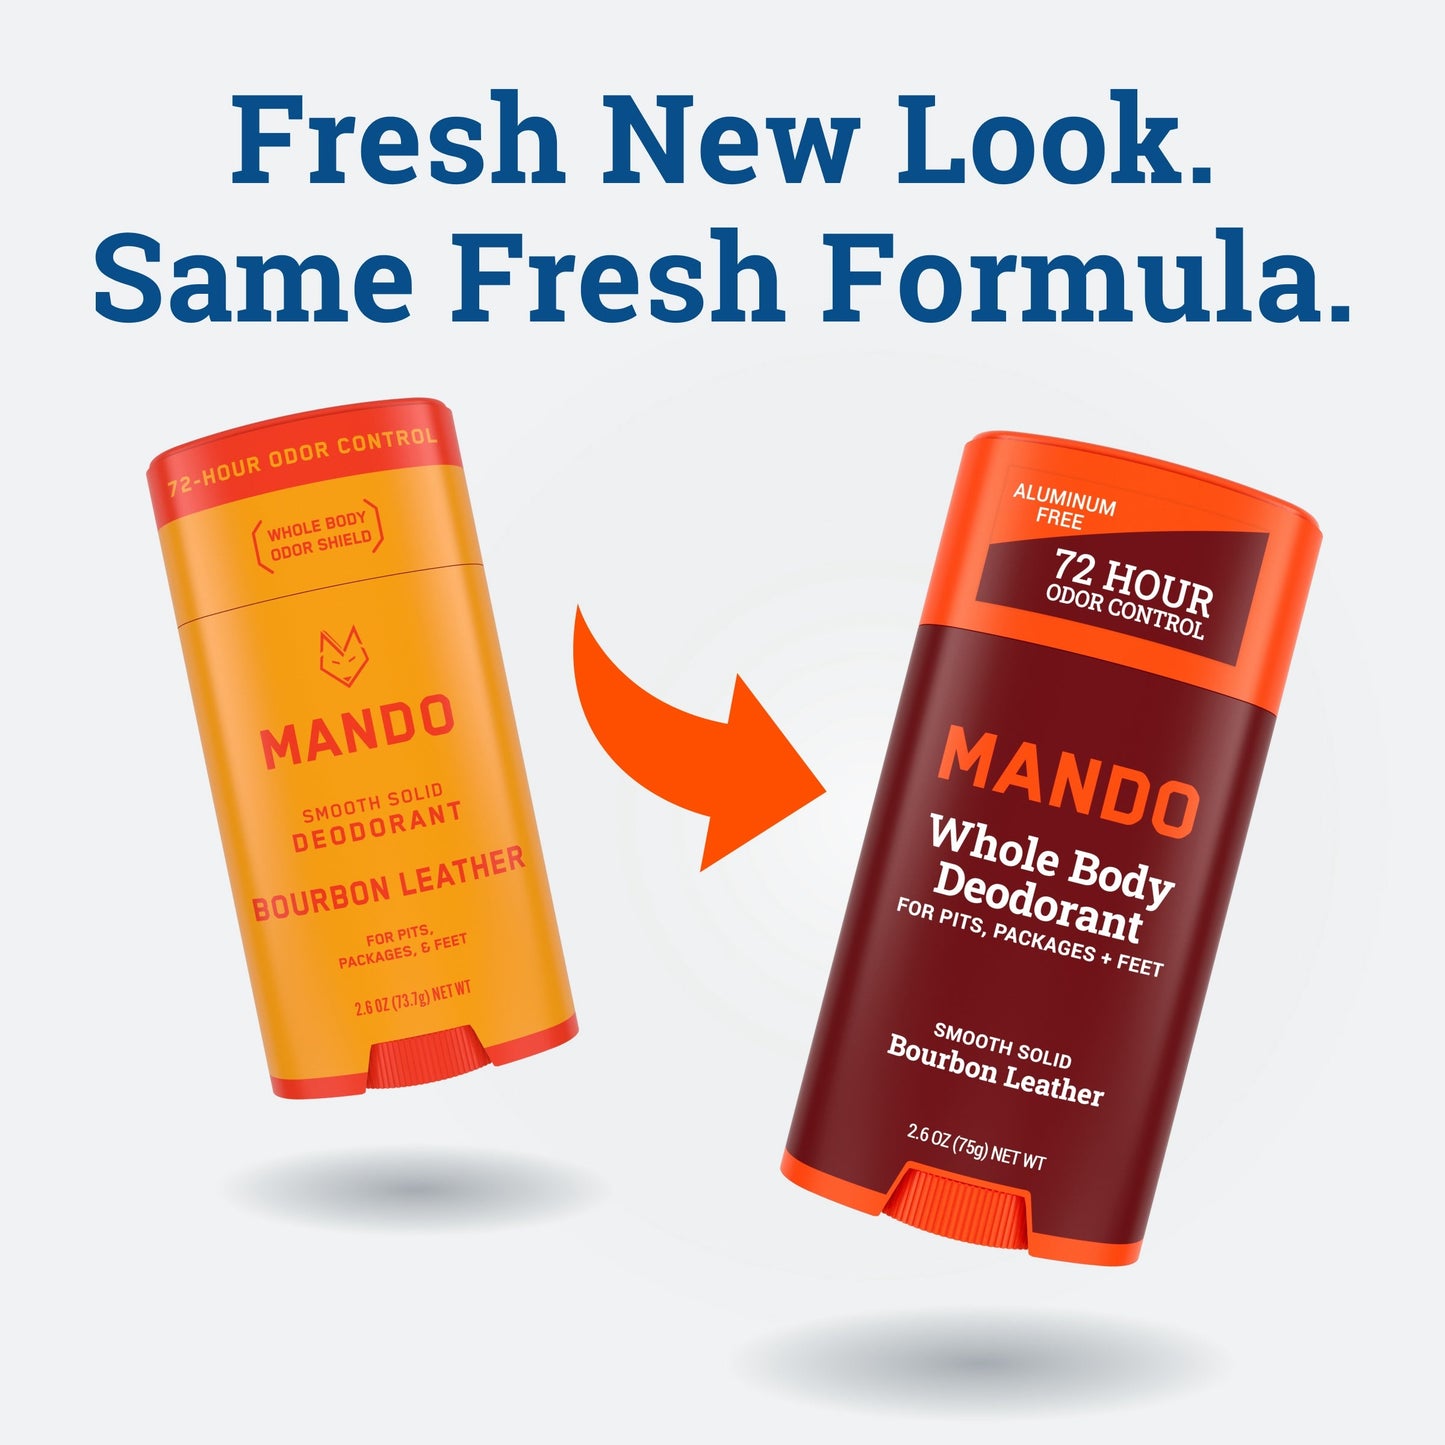 transition image of bourbon leather solid stick from old to new packaging with text: Fresh New Look. Same Fresh formula. 